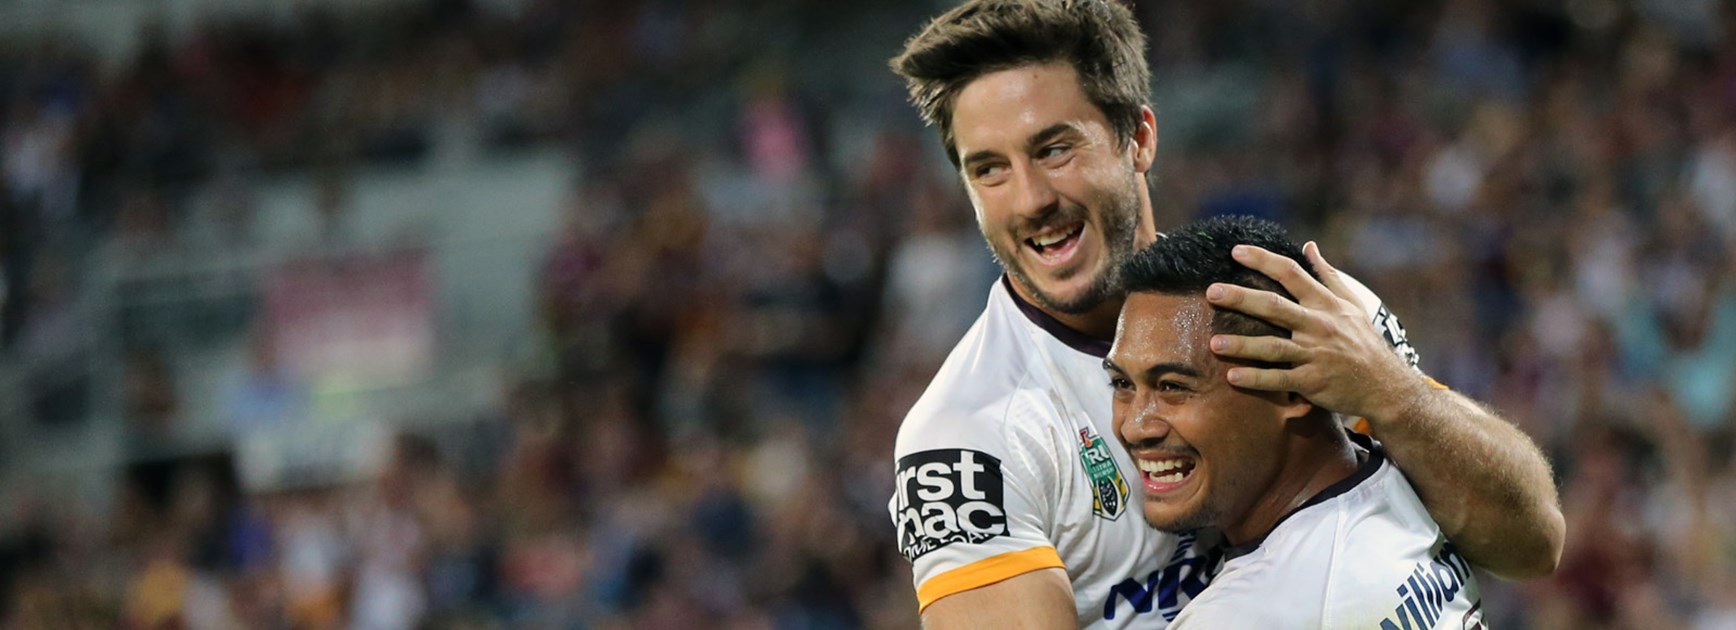 Broncos halves Anthony Milford and Ben Hunt celebrate a try.